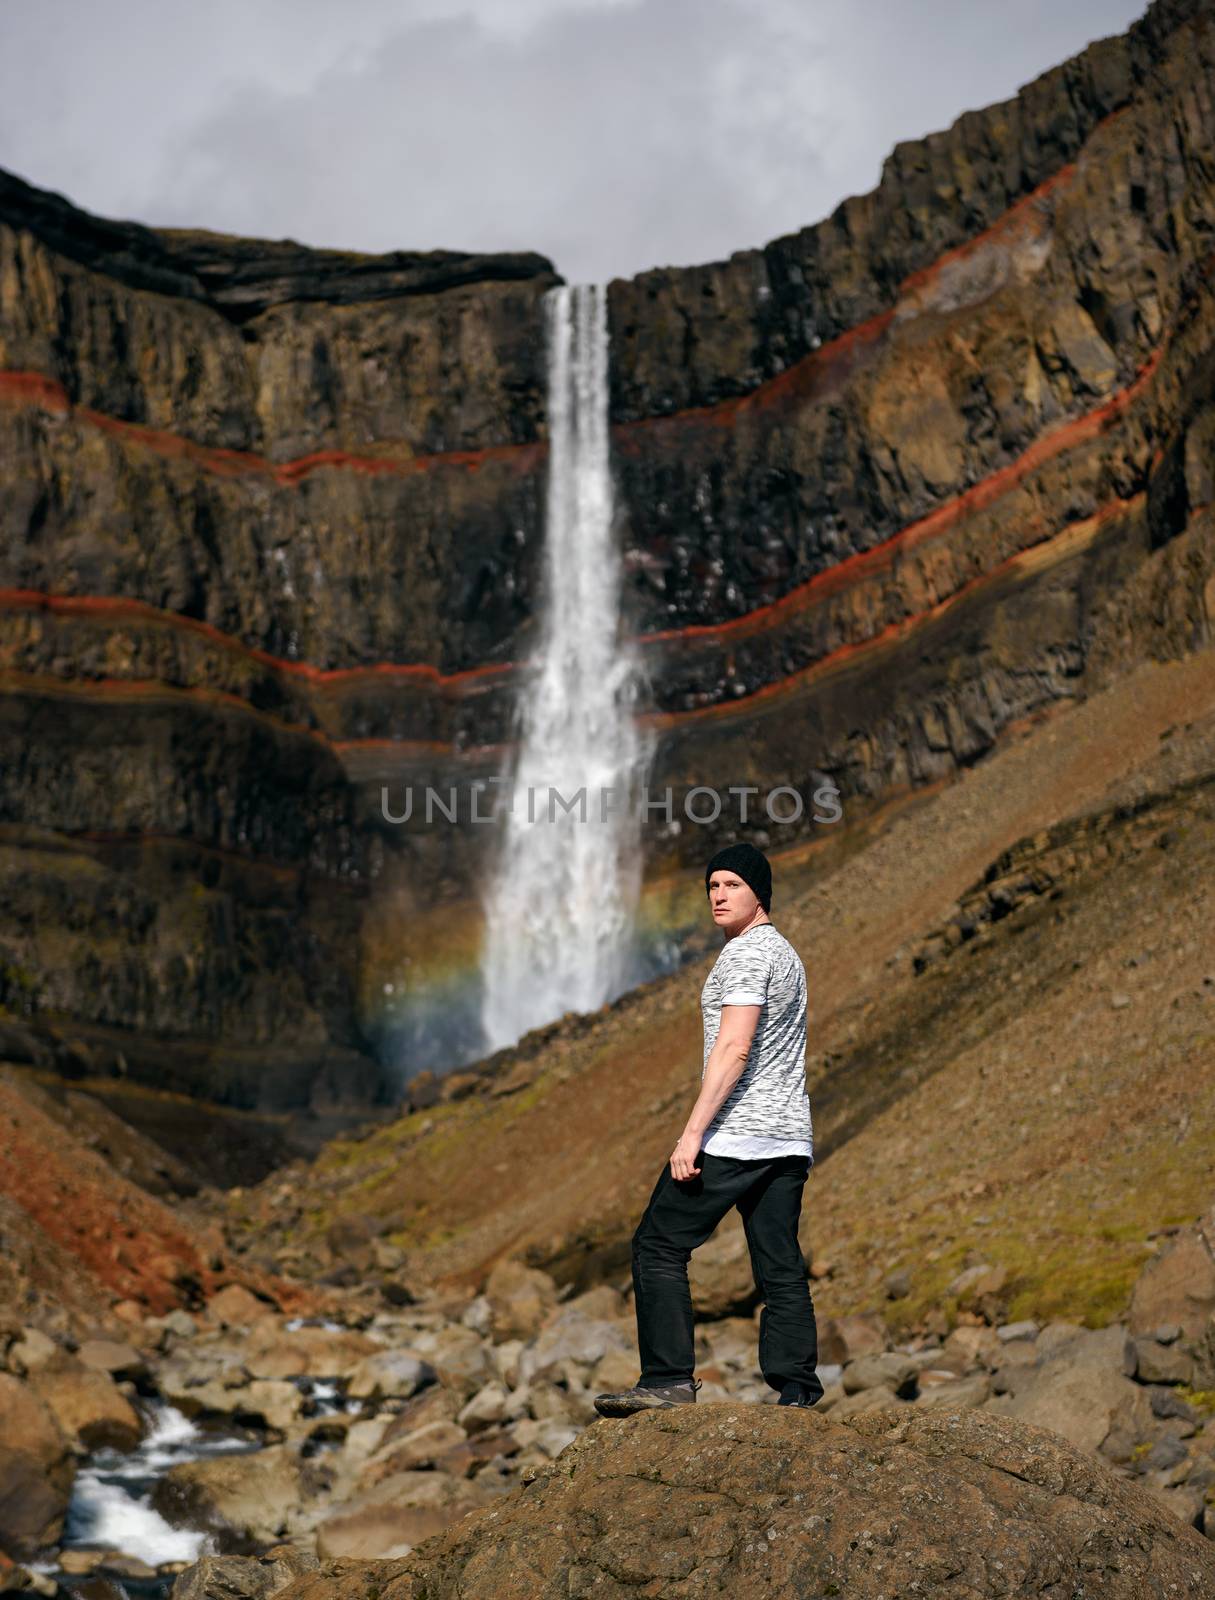 Tourist looking at the Hengifoss waterfall in Iceland. Hengifoss is the third highest waterfall in Iceland and is surrounded by basaltic strata with red layers of clay between the basaltic layers.